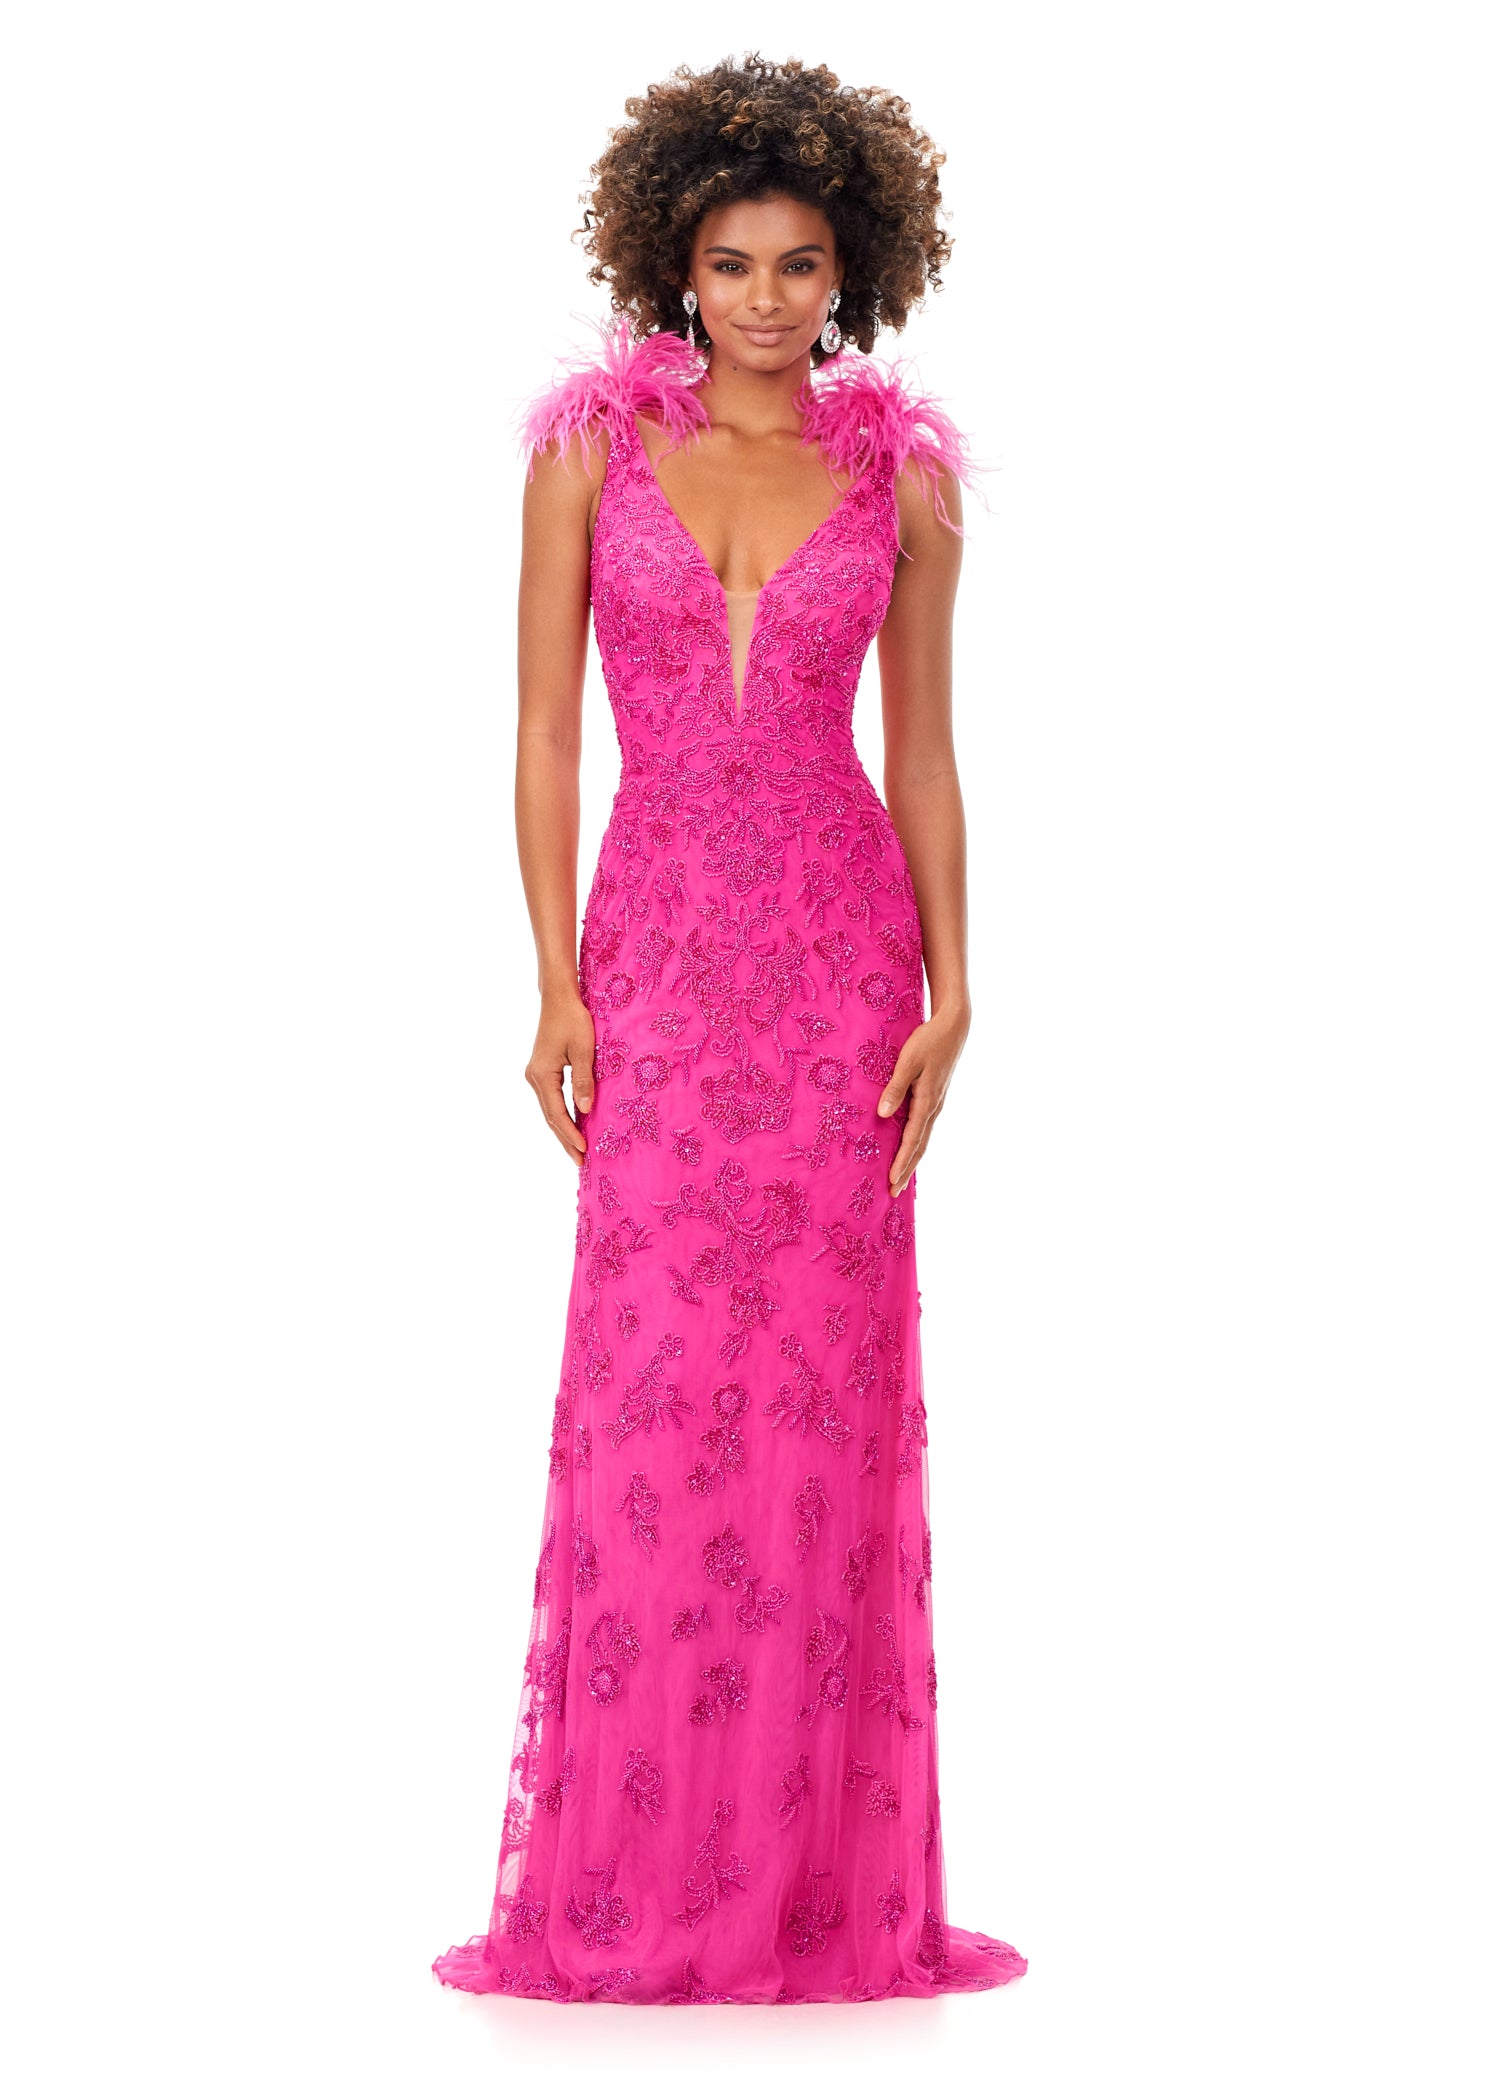 Ashley Lauren 11349 Beading and feathers! This style features a v-neckline complete with feather shoulder details. Gorgeous beading is scattered throughout the gown. V-Neckline Feather Shoulders V-Back Sweep Train COLORS: Hot Pink, Ivory, Sky, Black